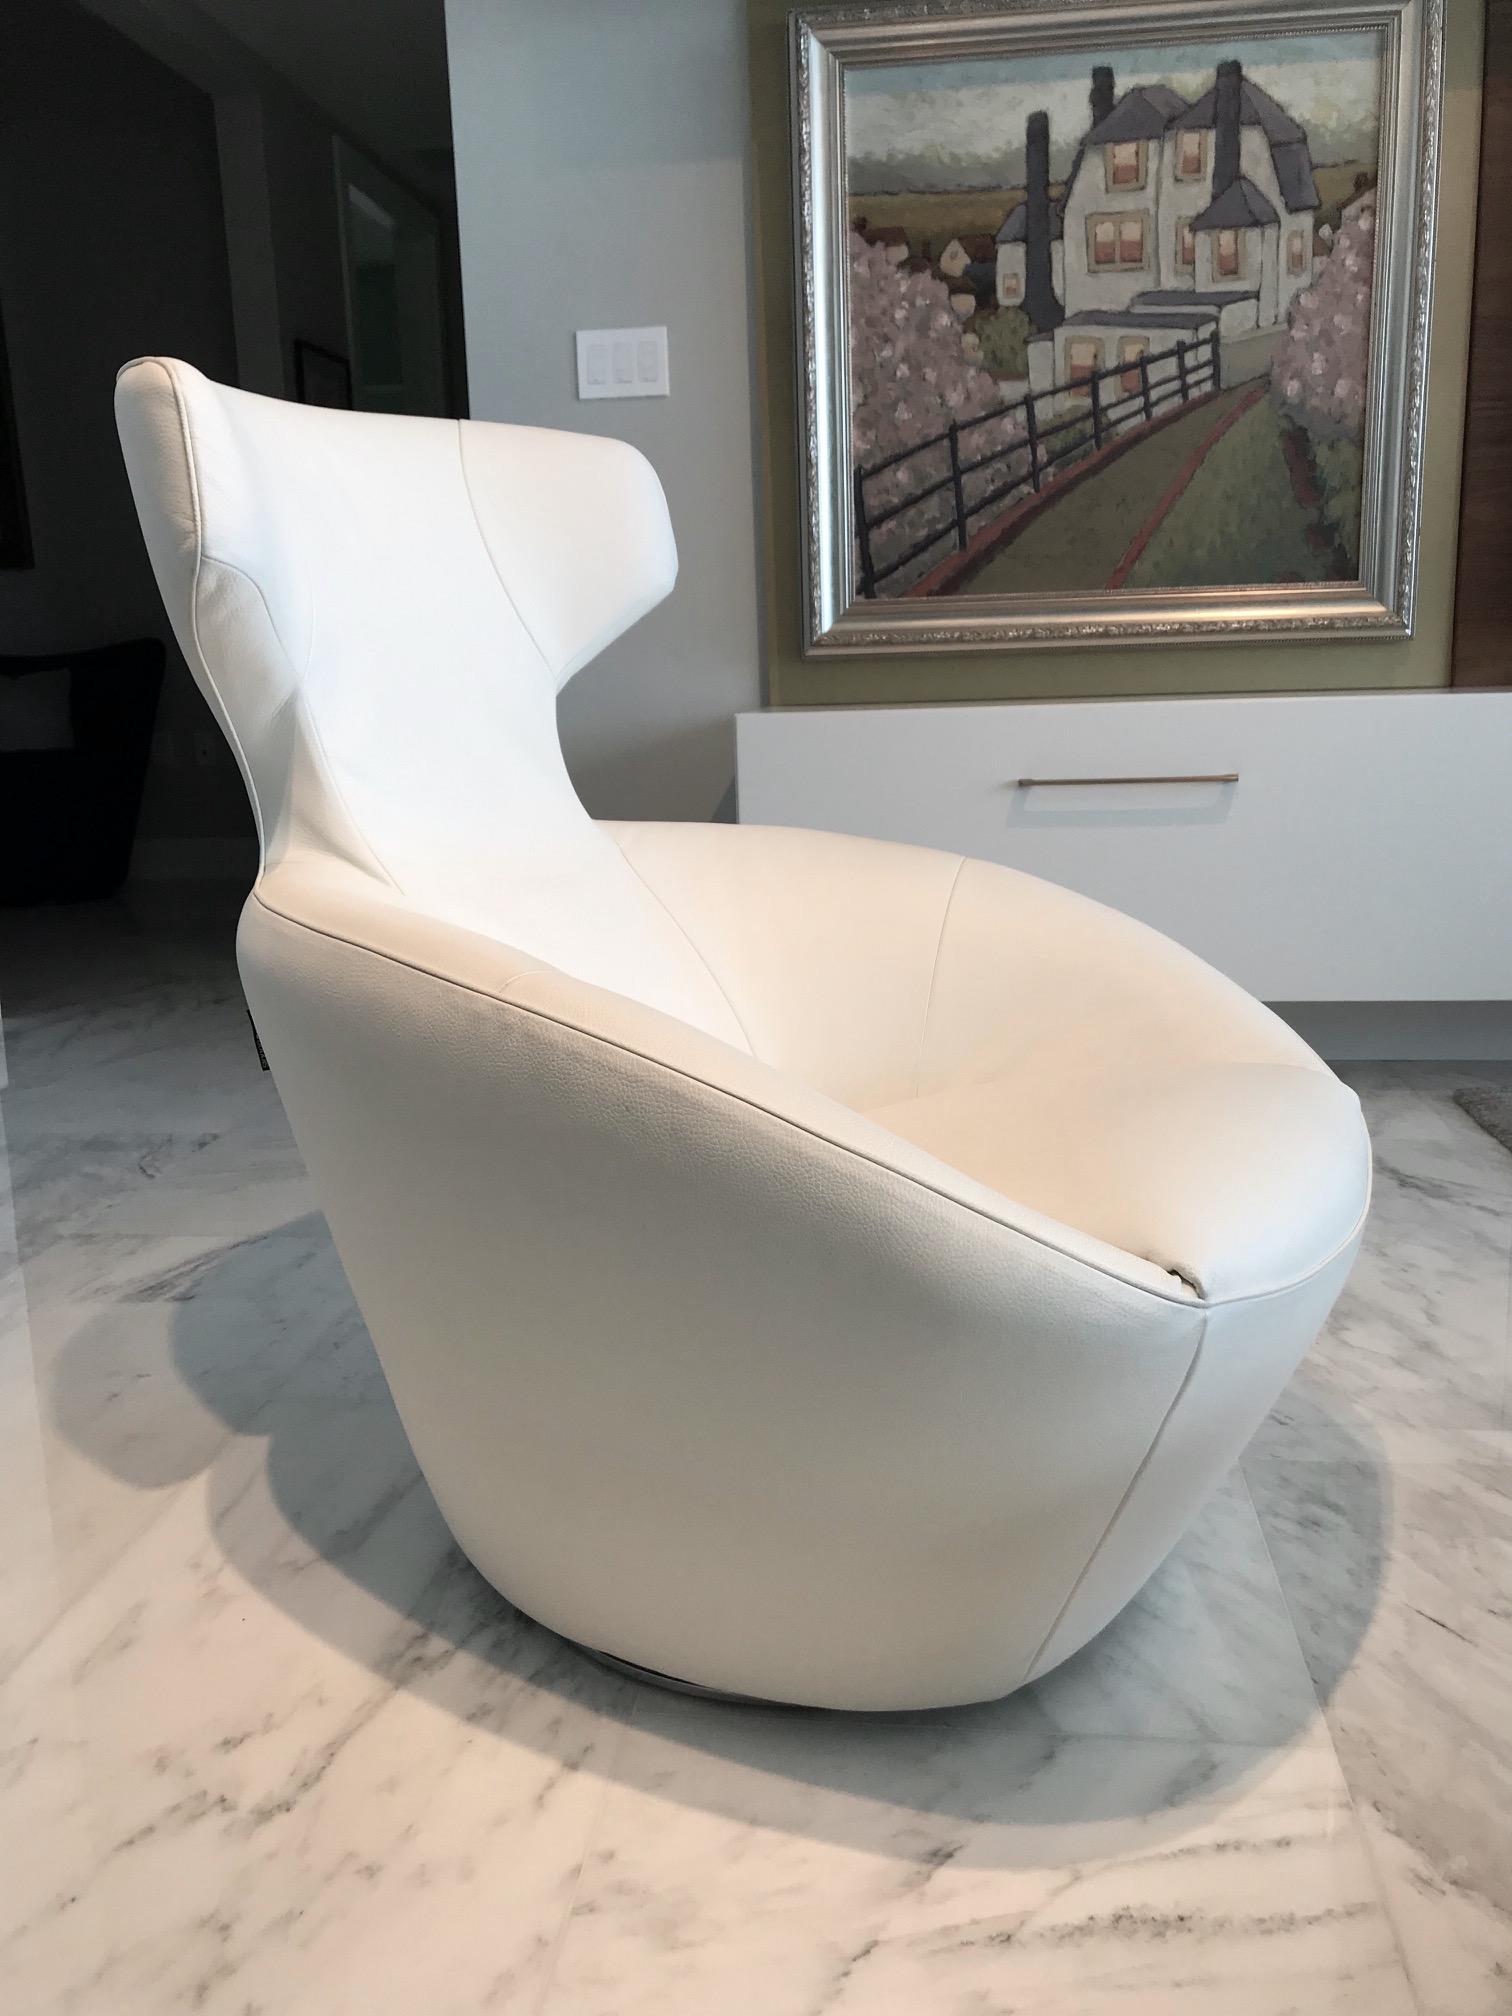 Ultra-luxury lounge chair in custom luxury white leather. From the Edito series designed by Sacha Lakic for Roche Bobois. Chair has Mid-Century Modern inspired form reminiscent of Space Age designs. Features pivoting swivel base design with auto